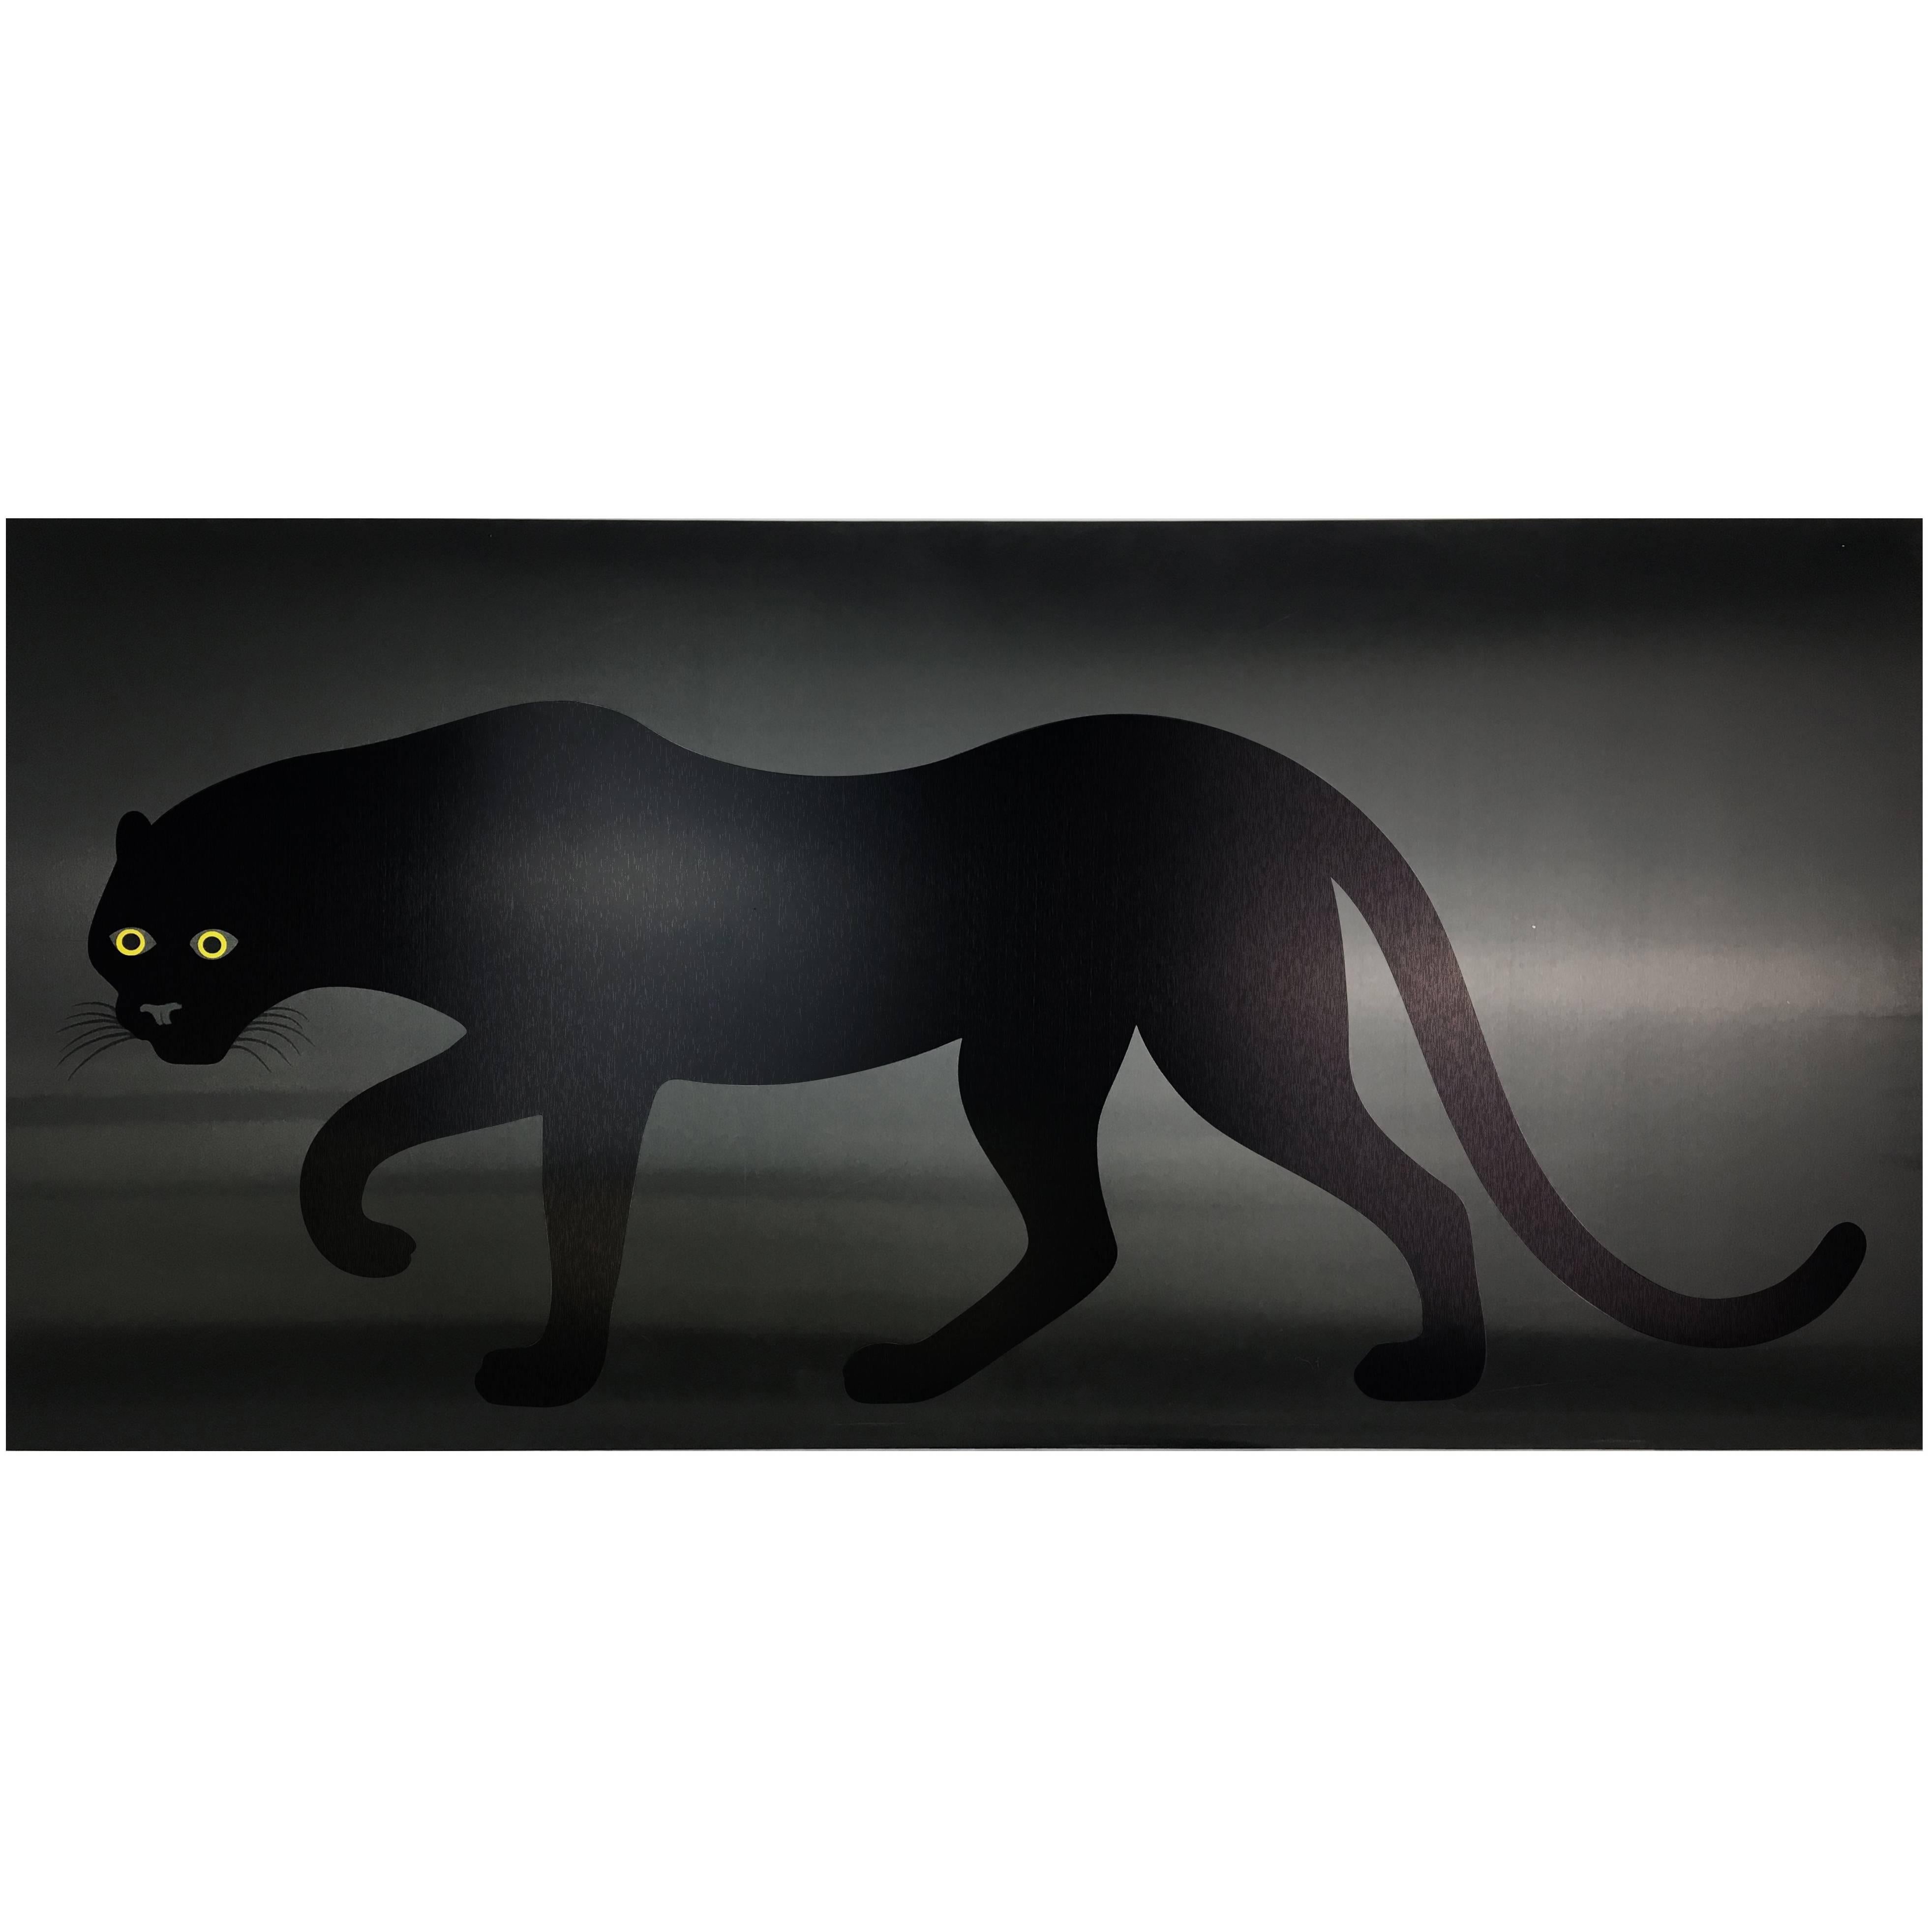 Enzo Mari Panther Poster on Black Plastic For Sale